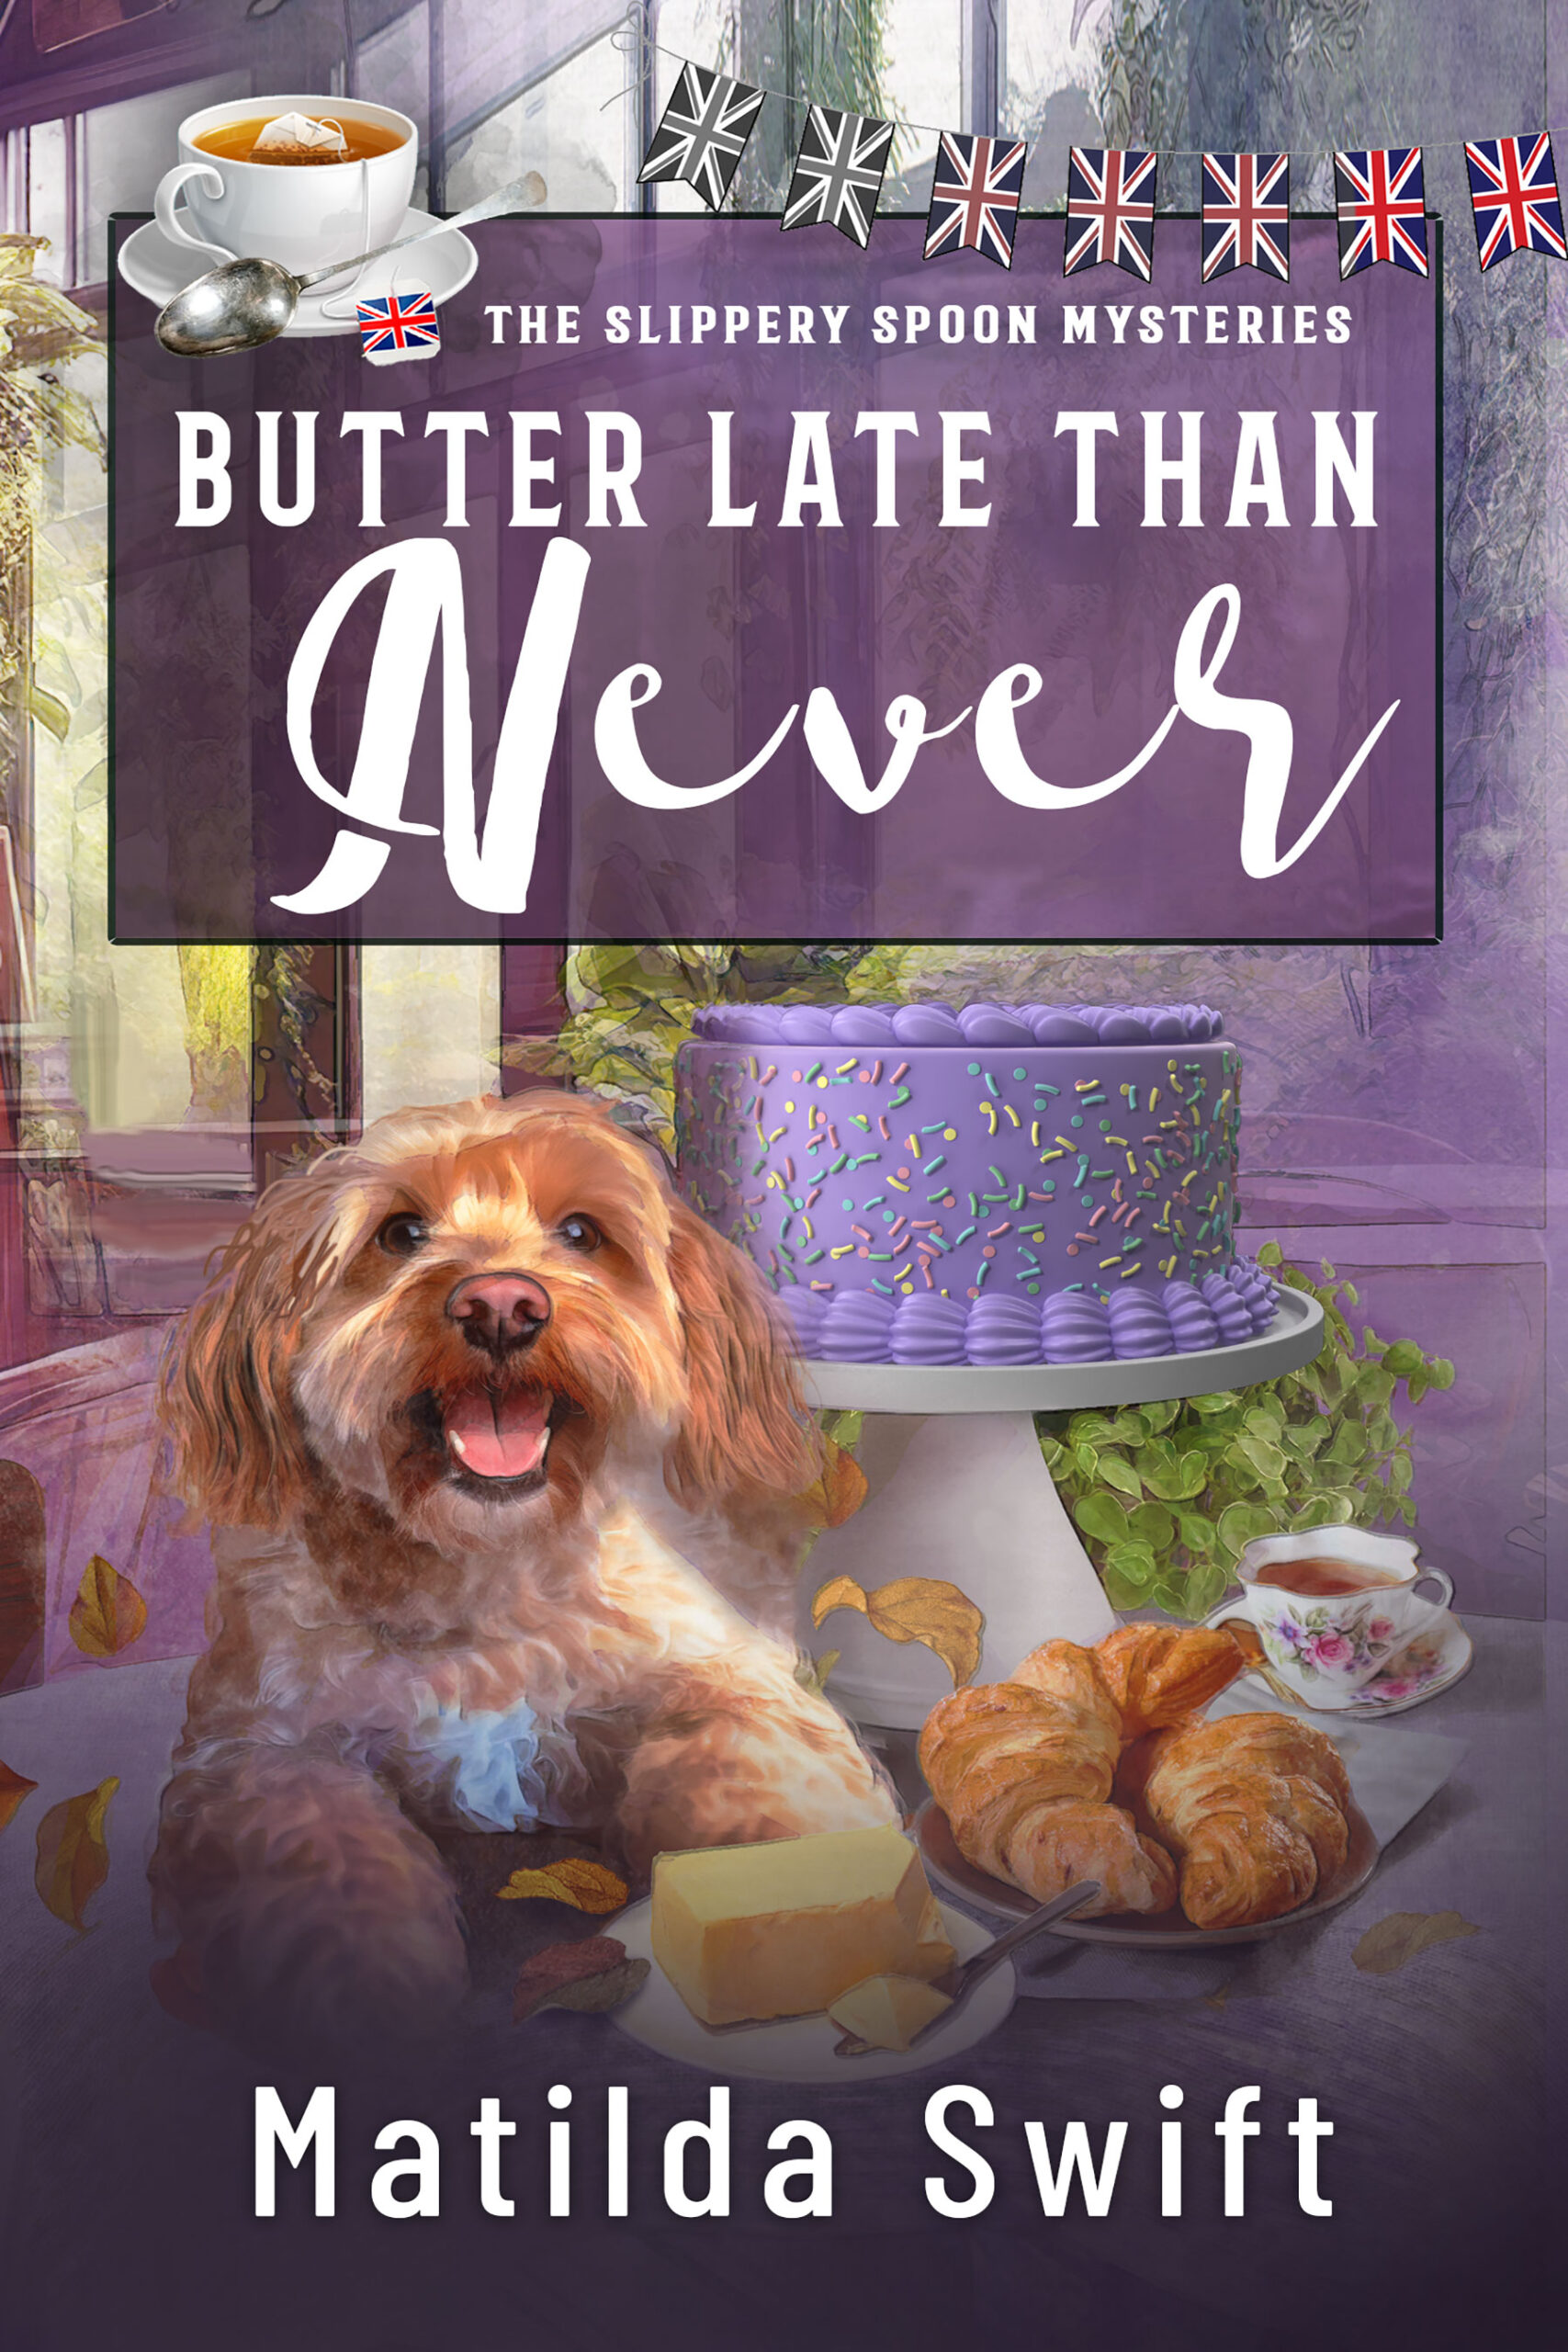 Butter Late than Never (The Slippery Spoon Mysteries #3)